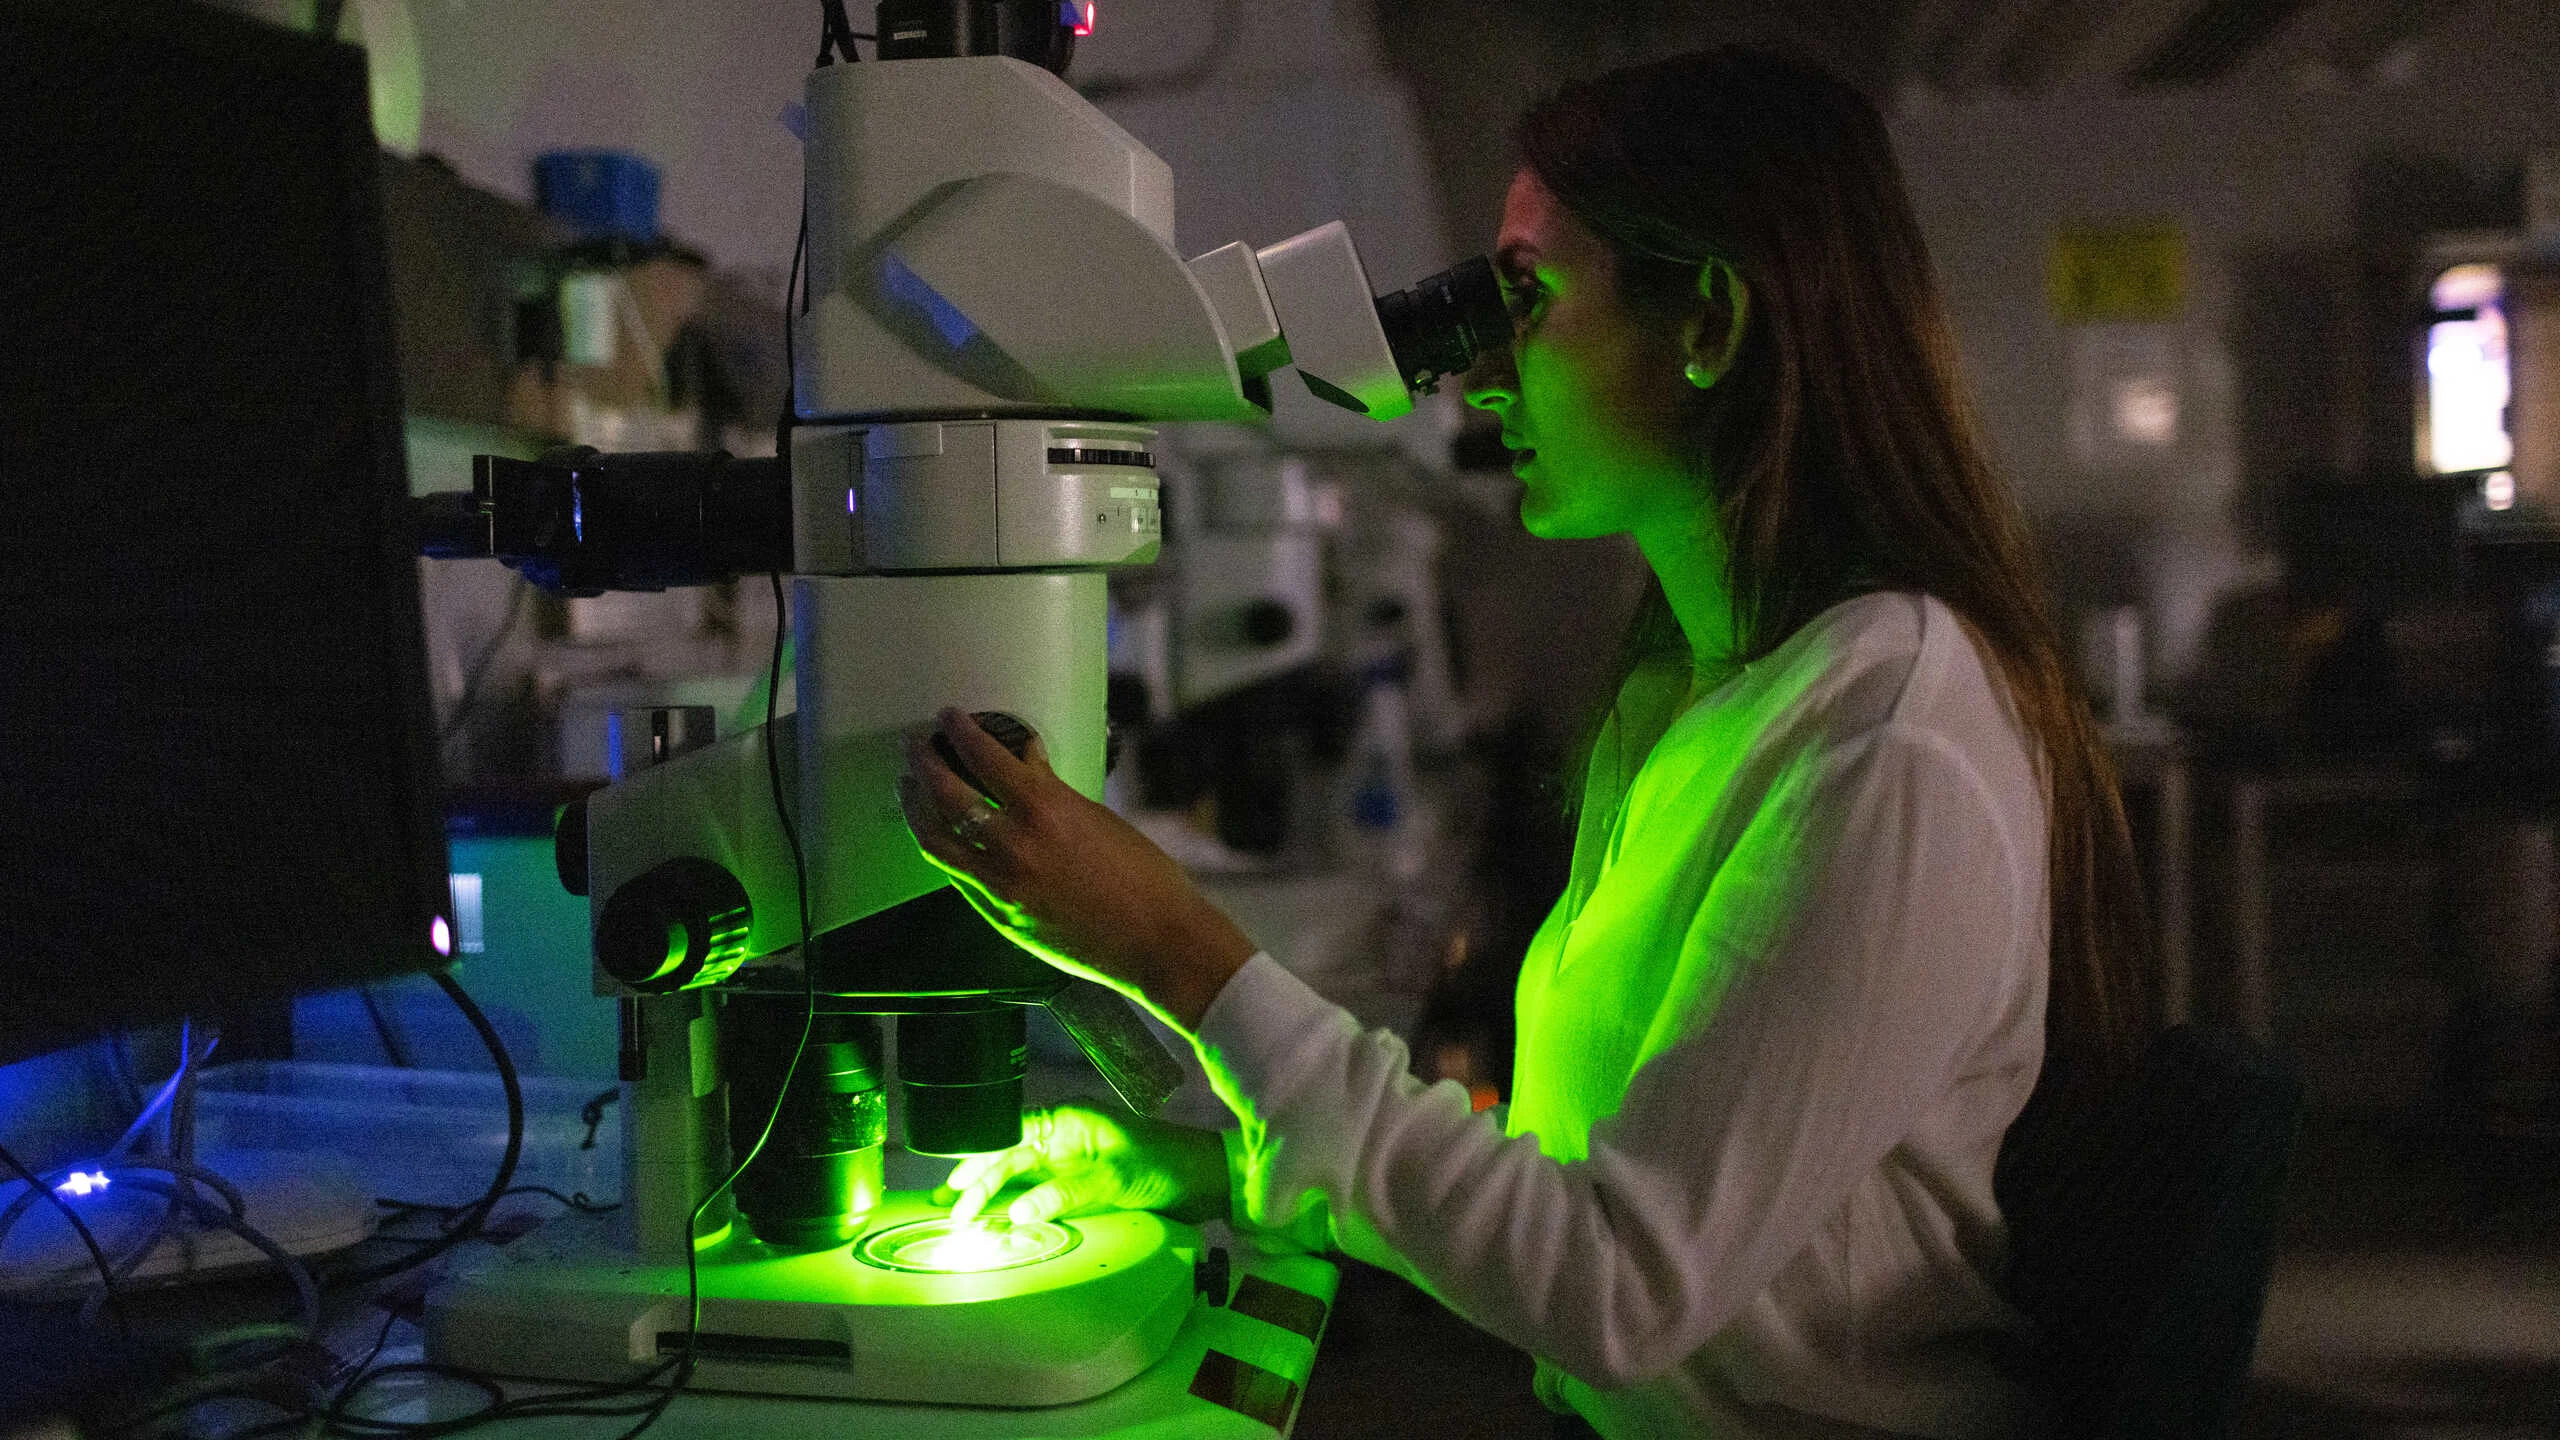 A woman looking down a microscope in a dark room with a green glow